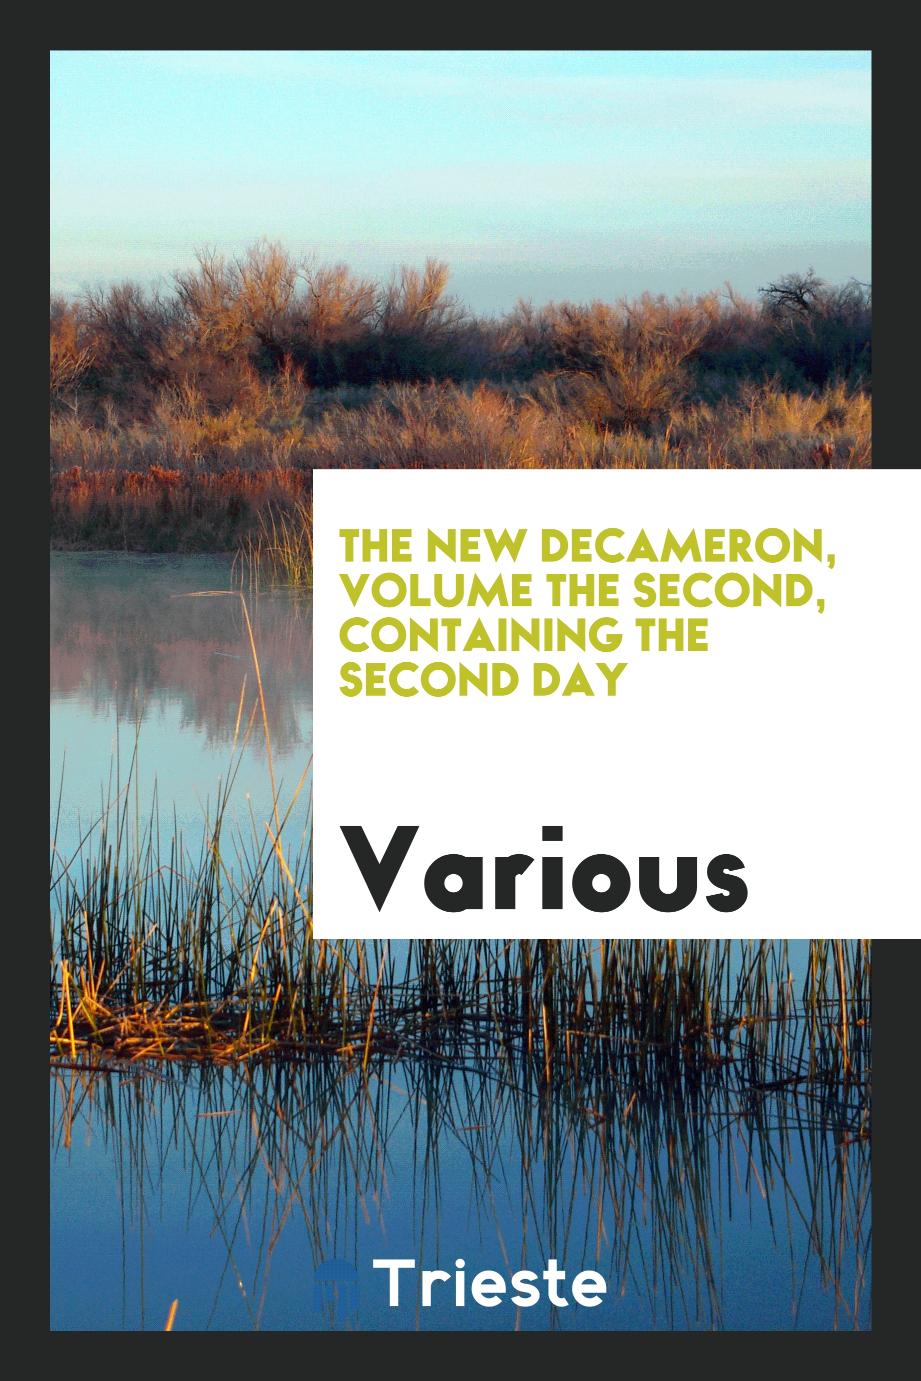 The New Decameron, Volume the Second, containing the second day